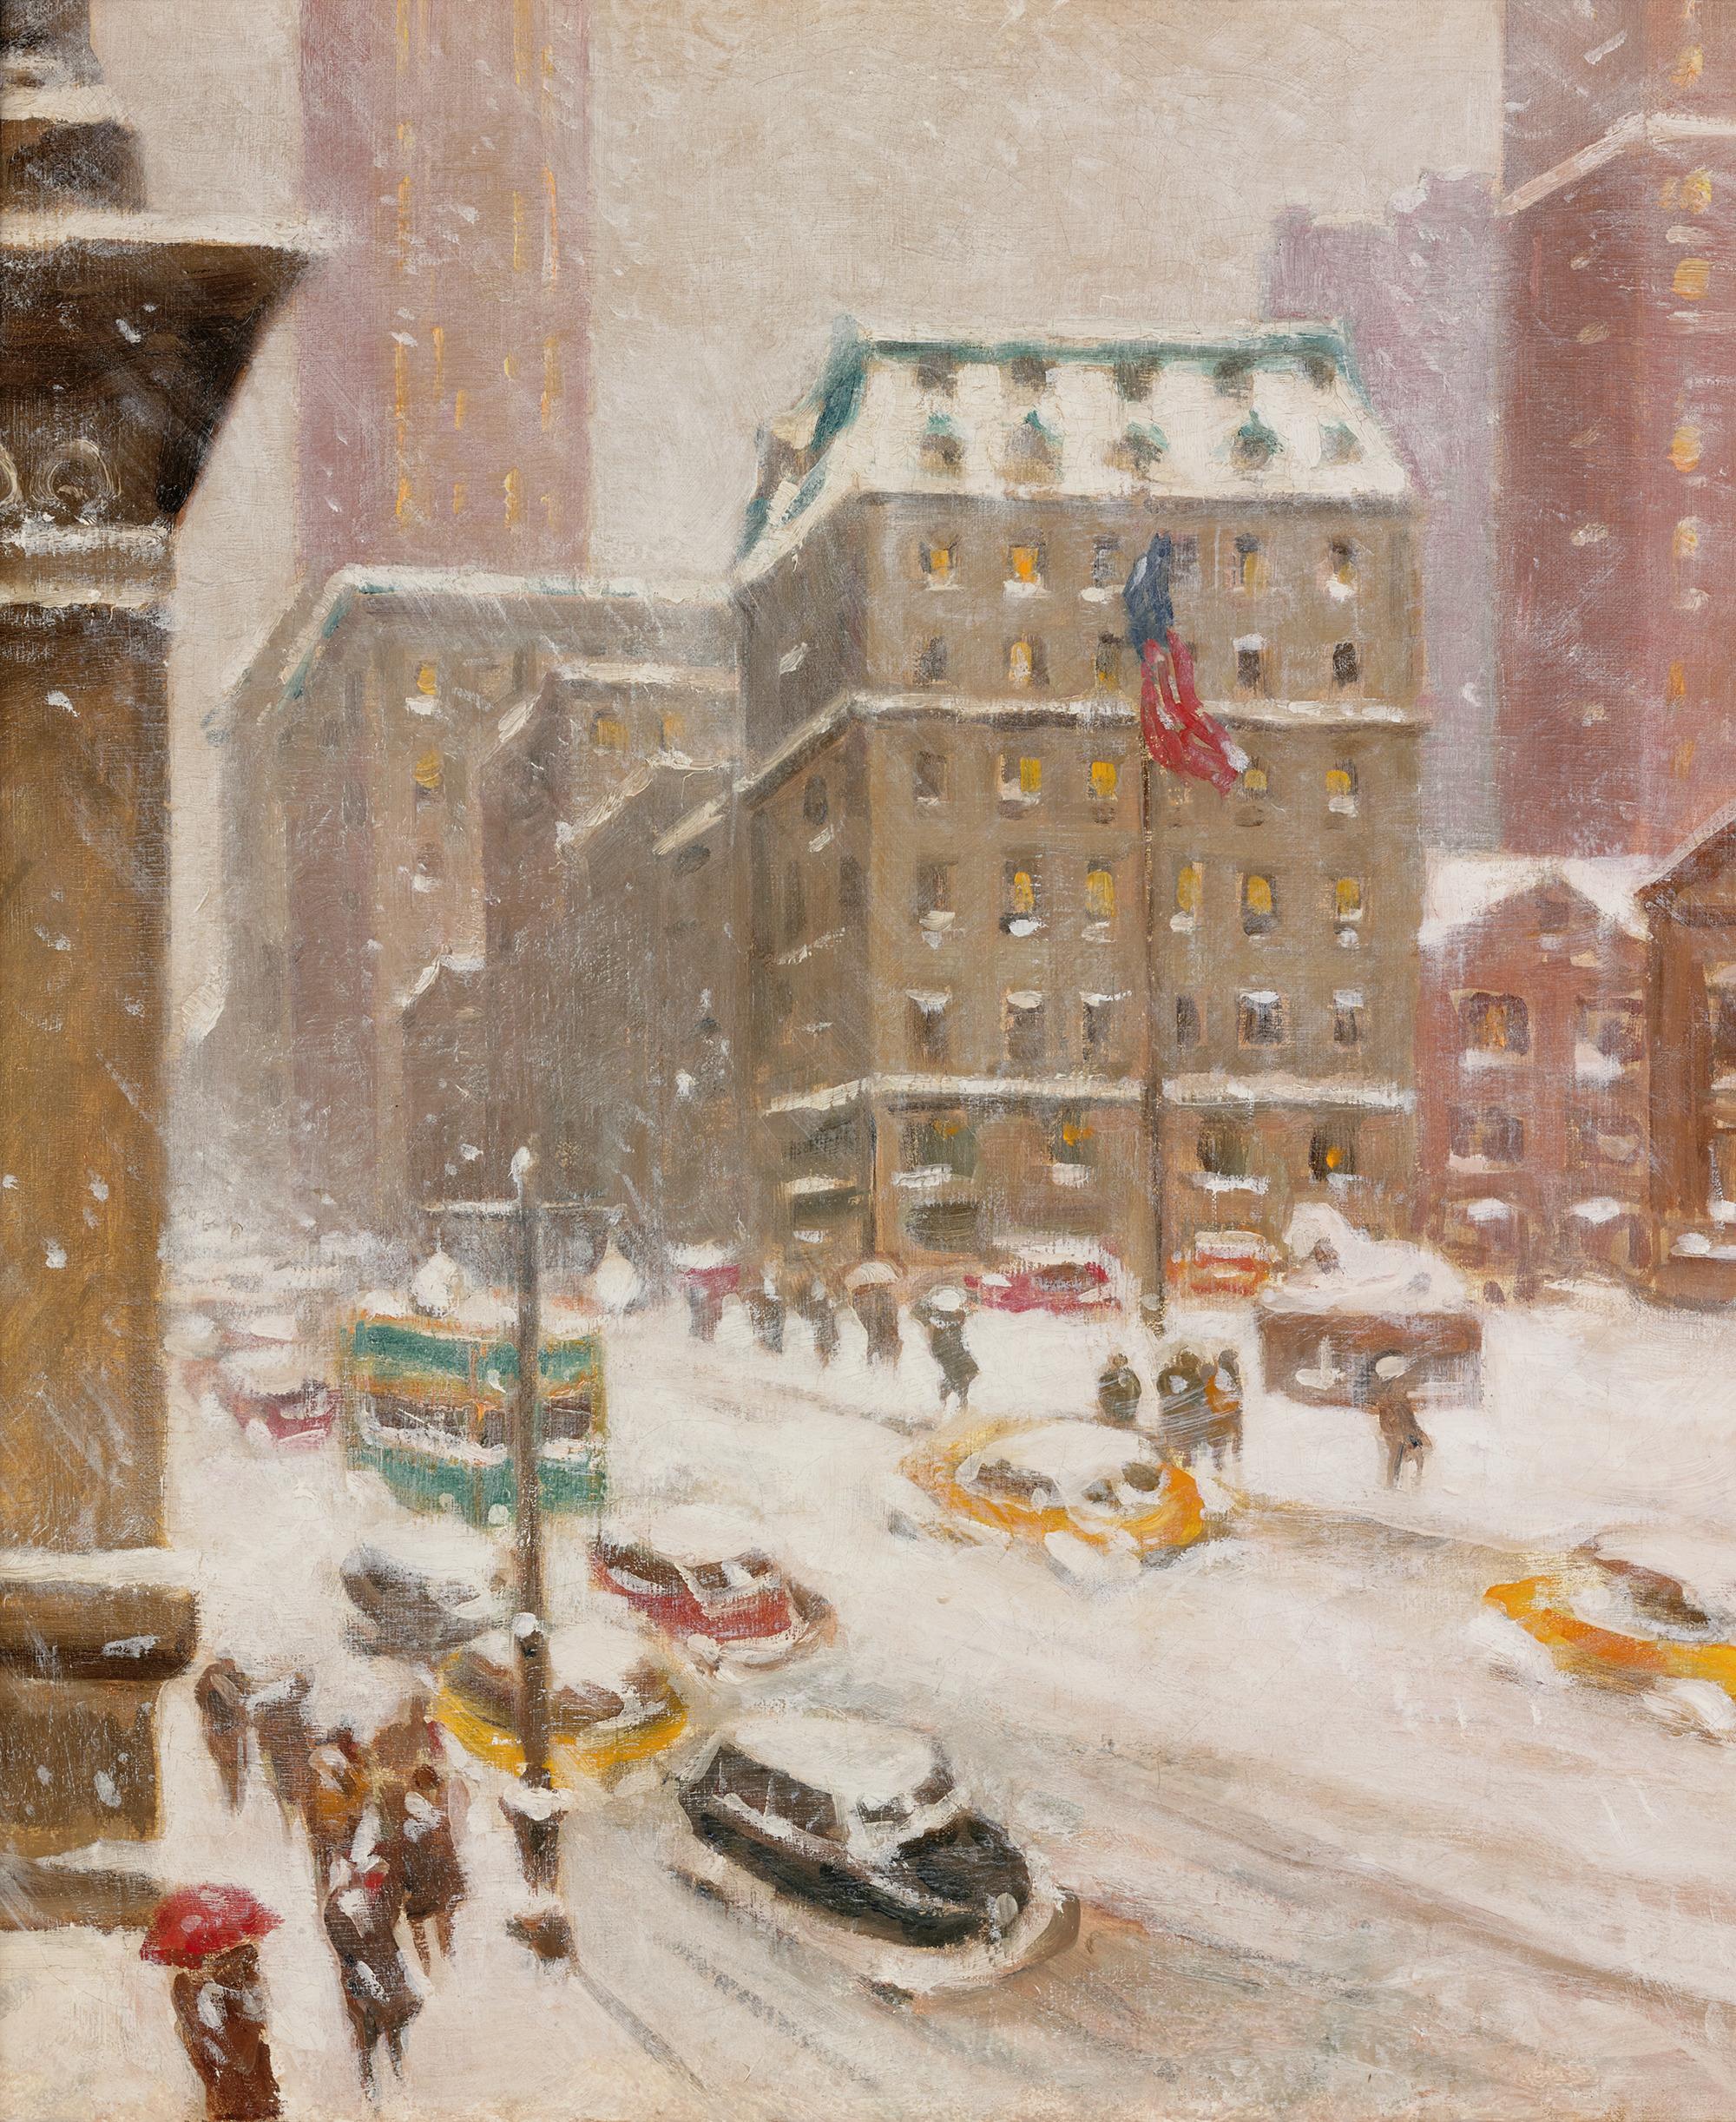 5th Avenue Storm at 42nd Street by Guy Carleton Wiggins 1